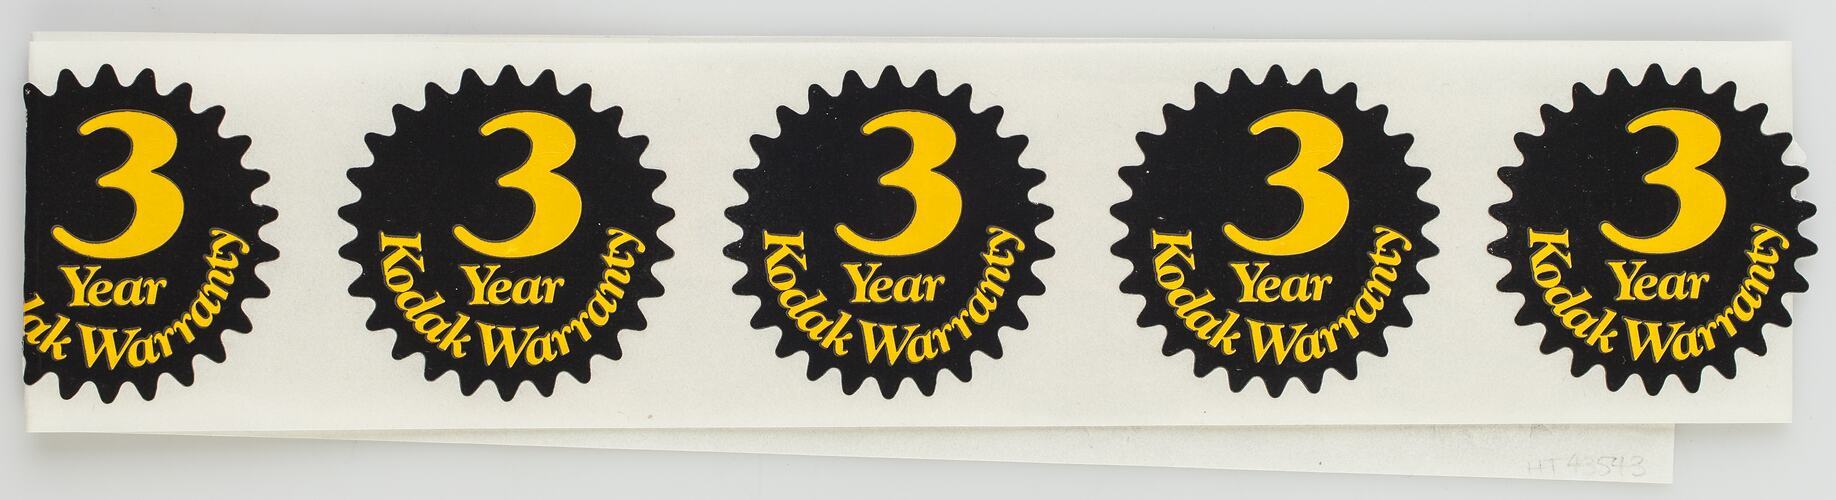 Strip of five black stickers with yellow printed text.